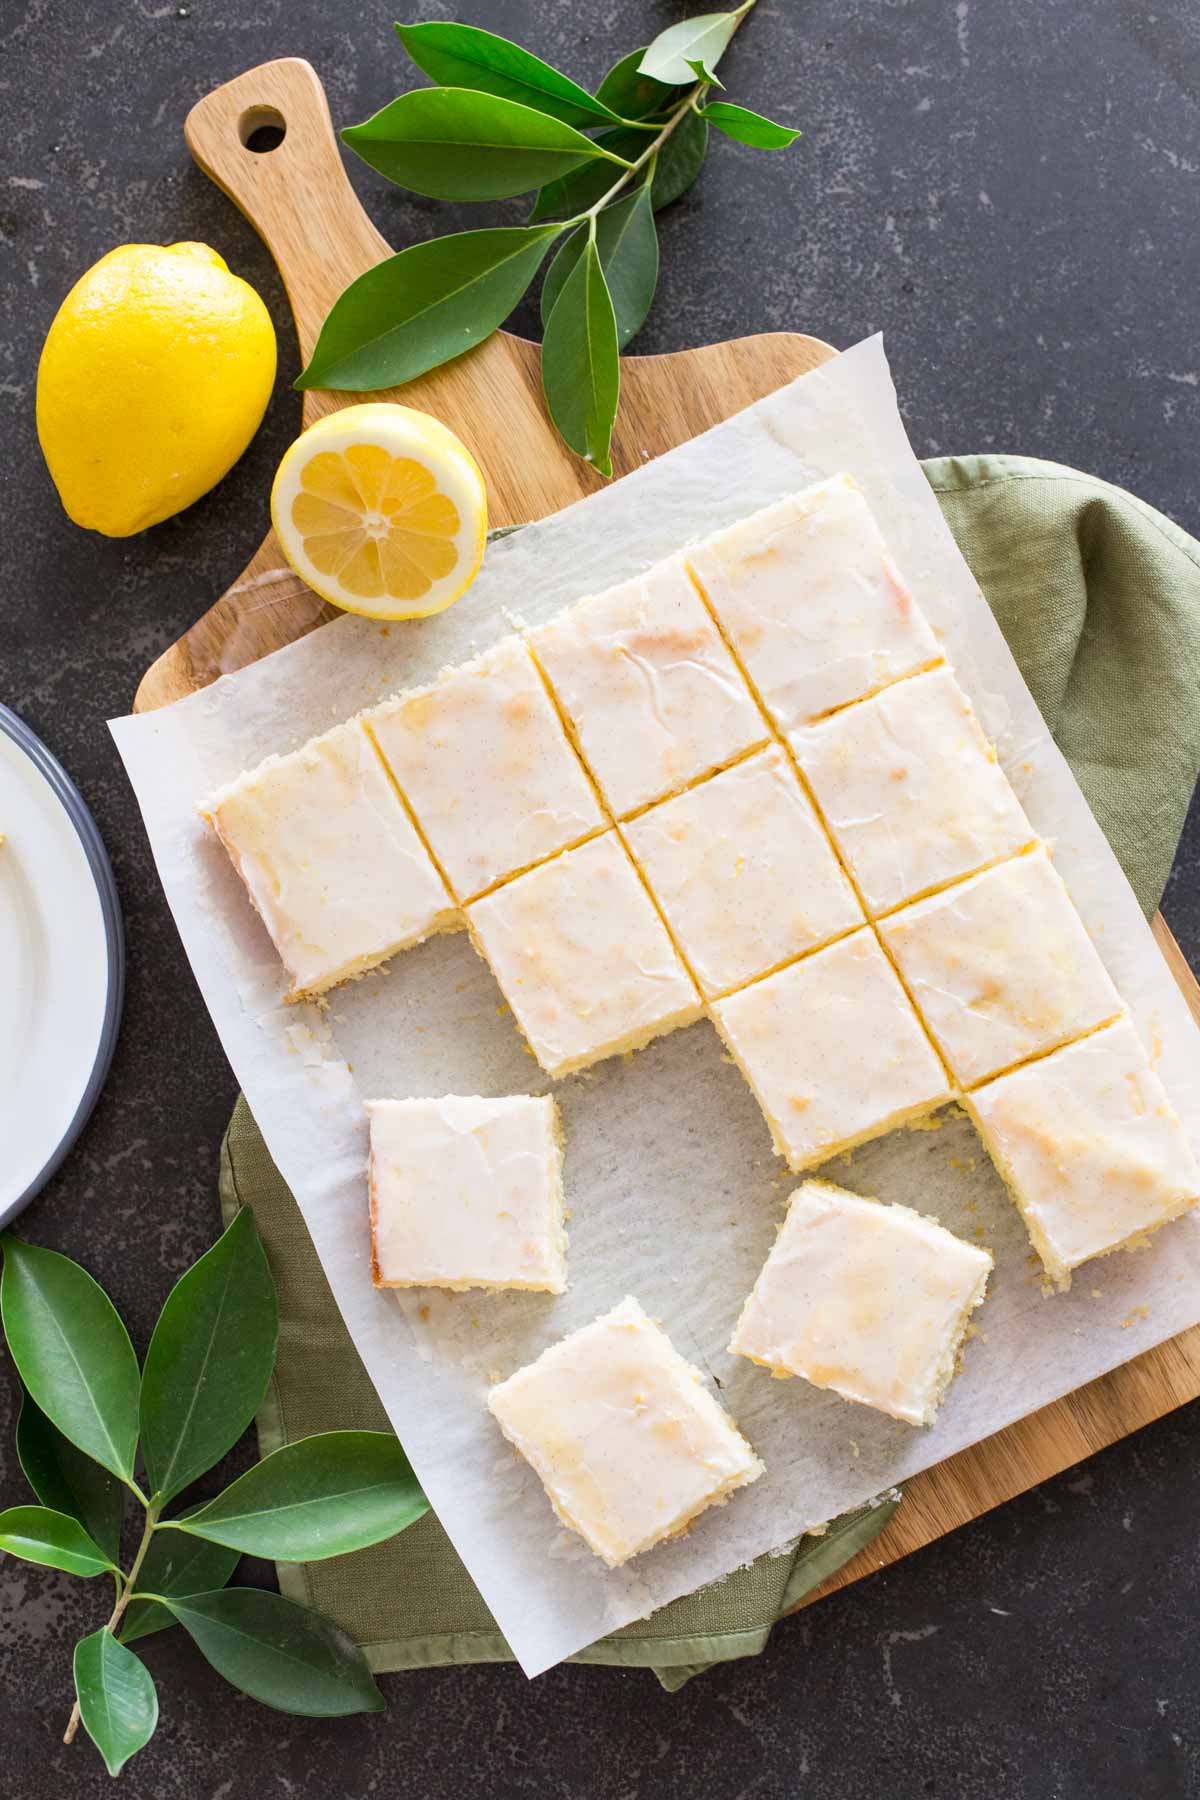 Vanilla Bean Lemon Bars cut into squares on parchment paper on top of a cutting board, with lemons and tree leaves next to the board. 